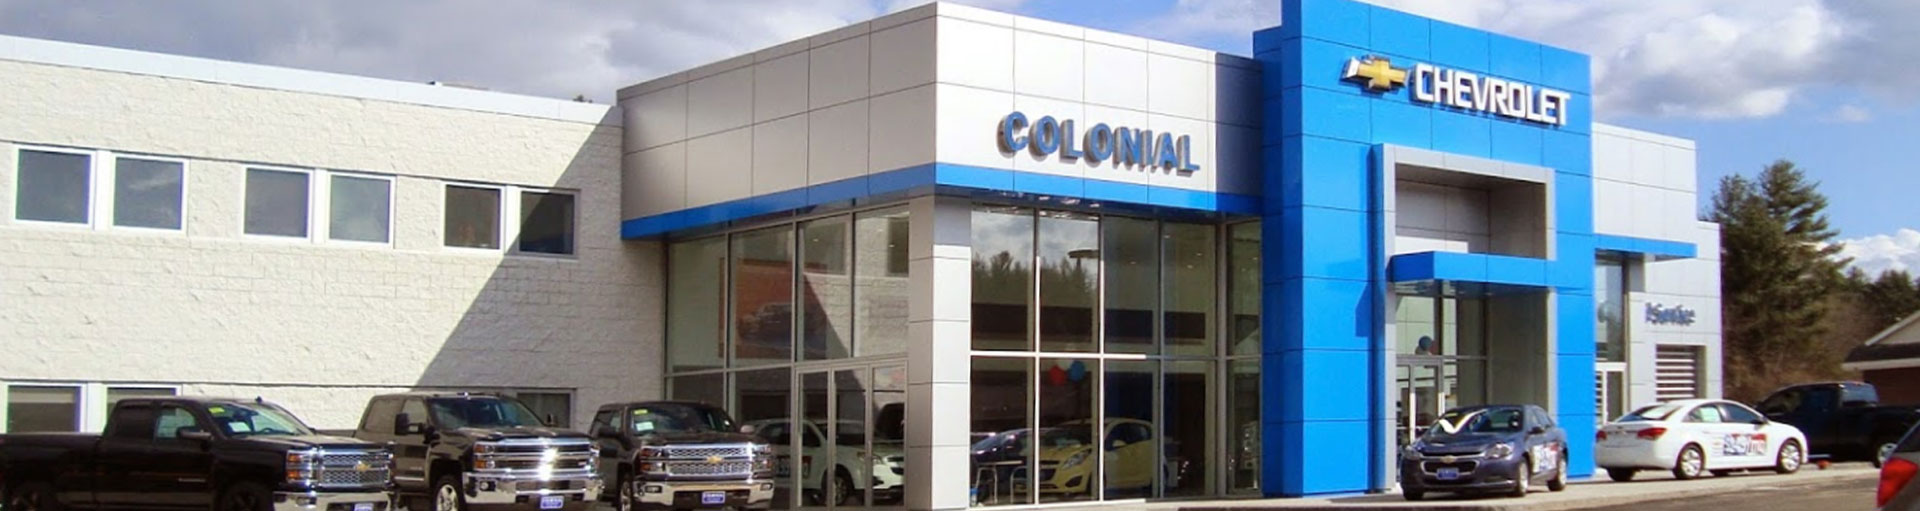 Colonial Chevrolet of Acton Battery Services